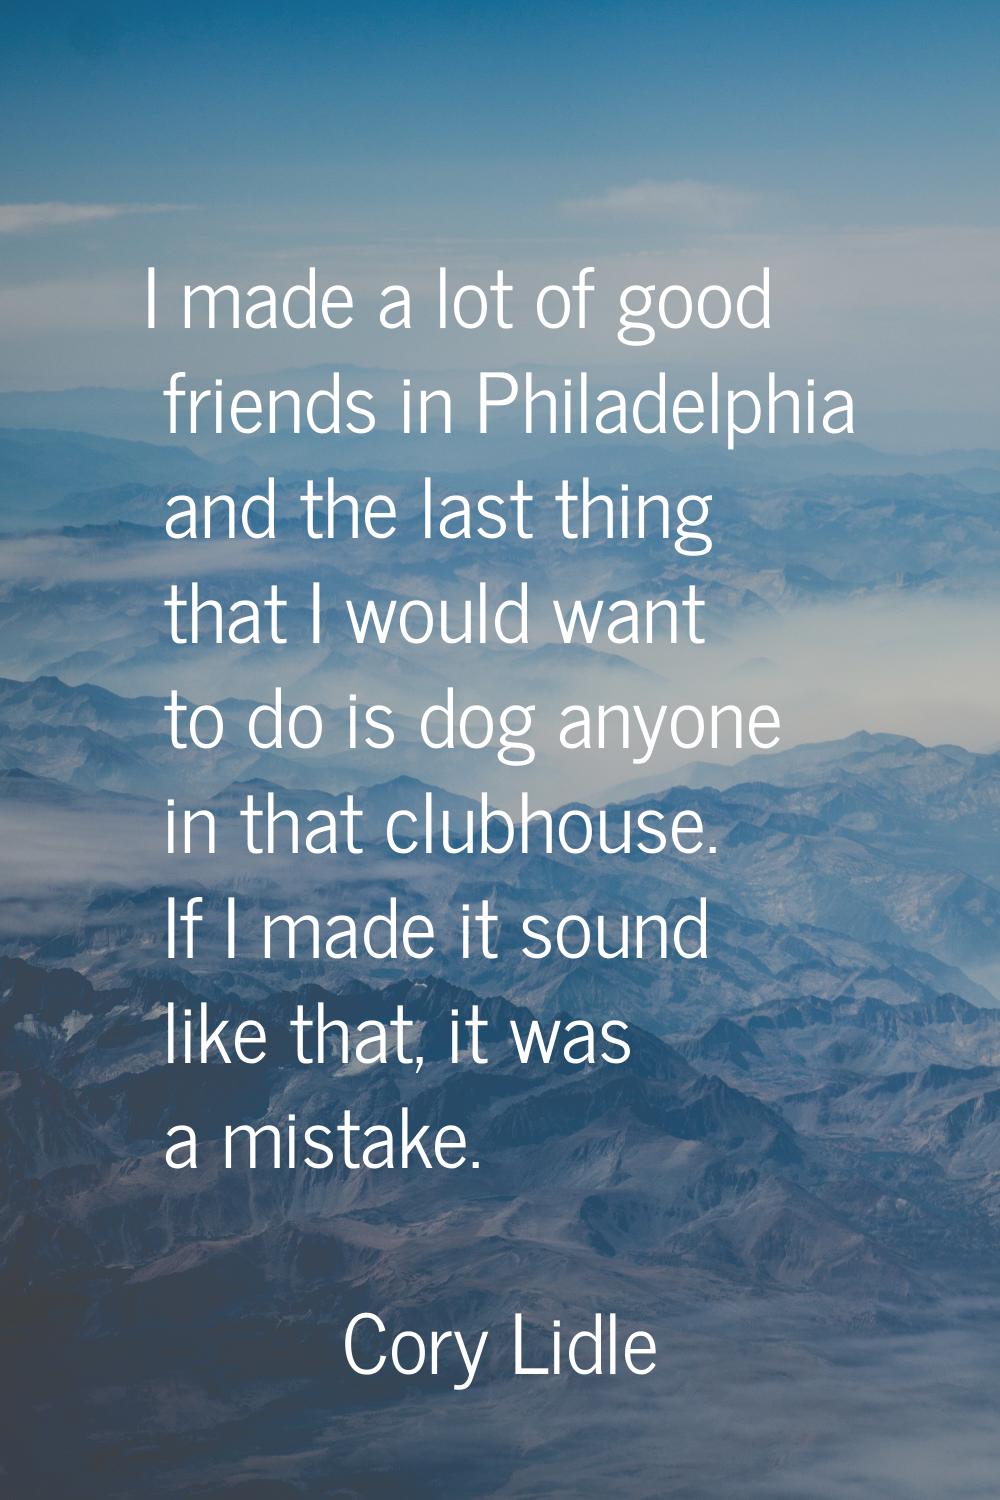 I made a lot of good friends in Philadelphia and the last thing that I would want to do is dog anyo